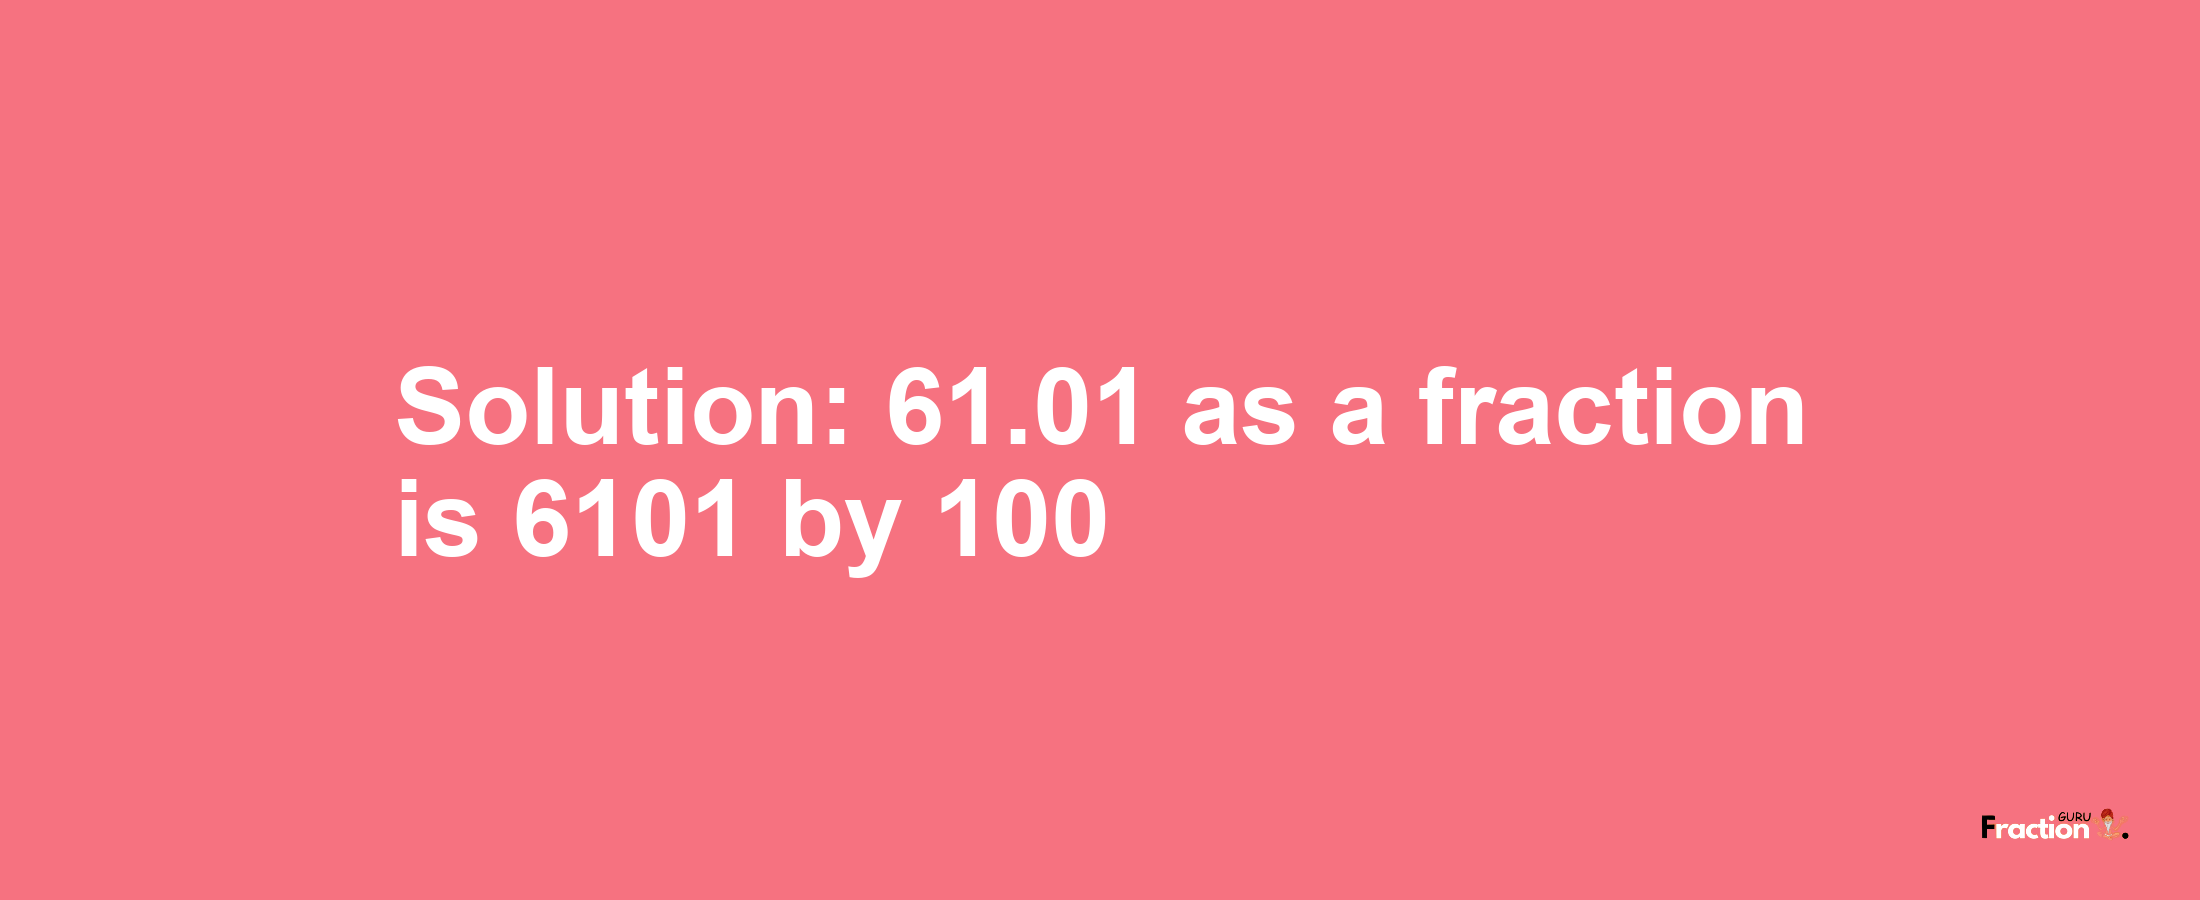 Solution:61.01 as a fraction is 6101/100